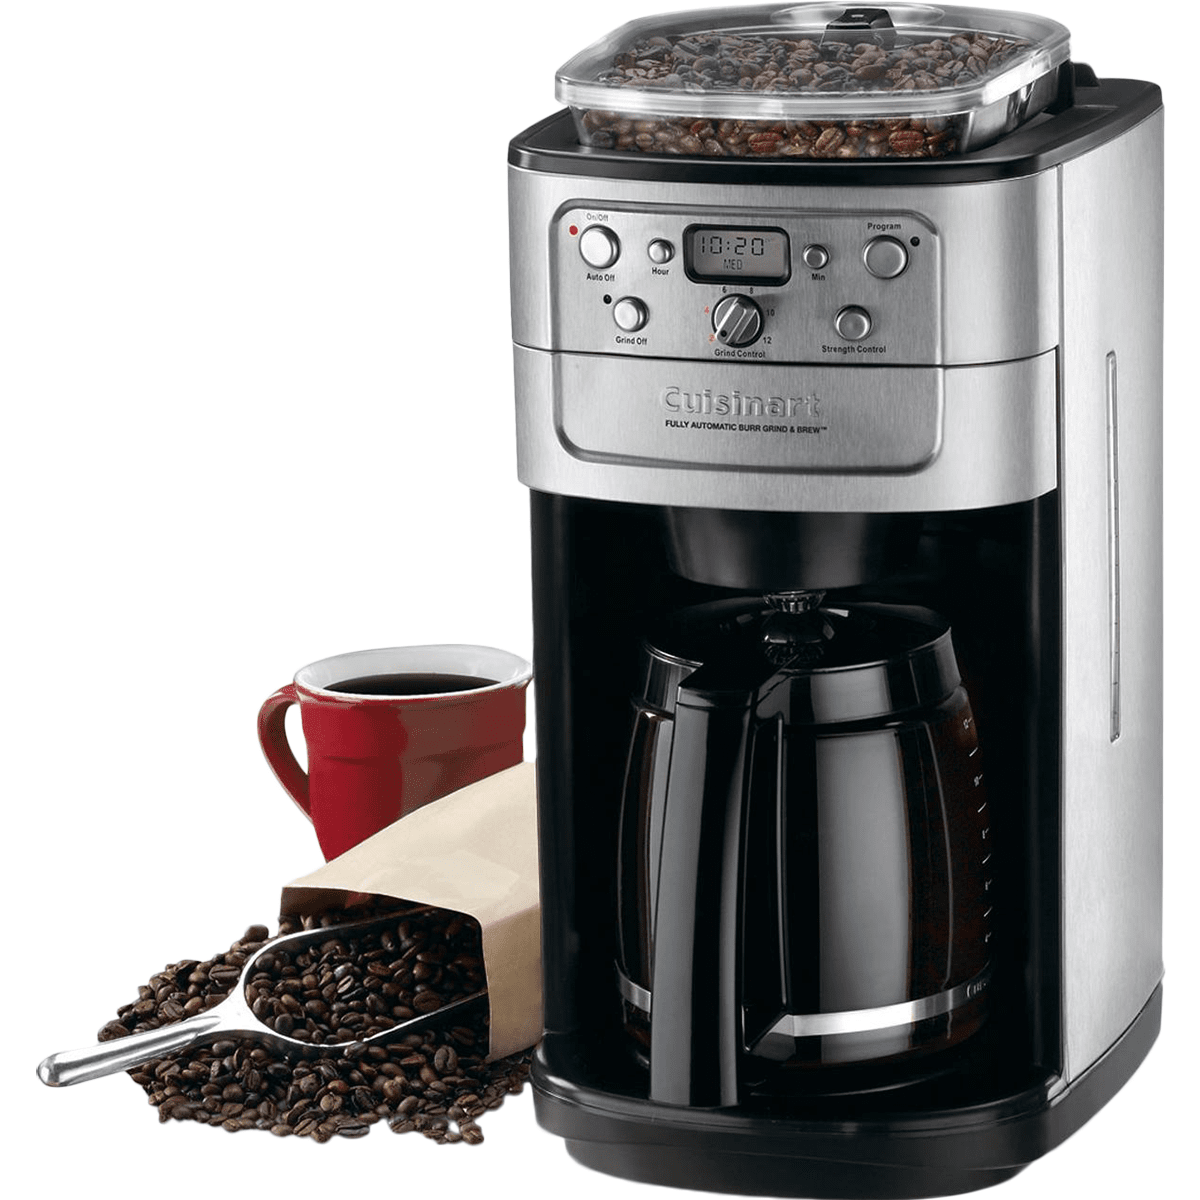 Cuisinart Burr Grind & Brew 12 Cup Automatic Coffee Maker (DGB-700BC)